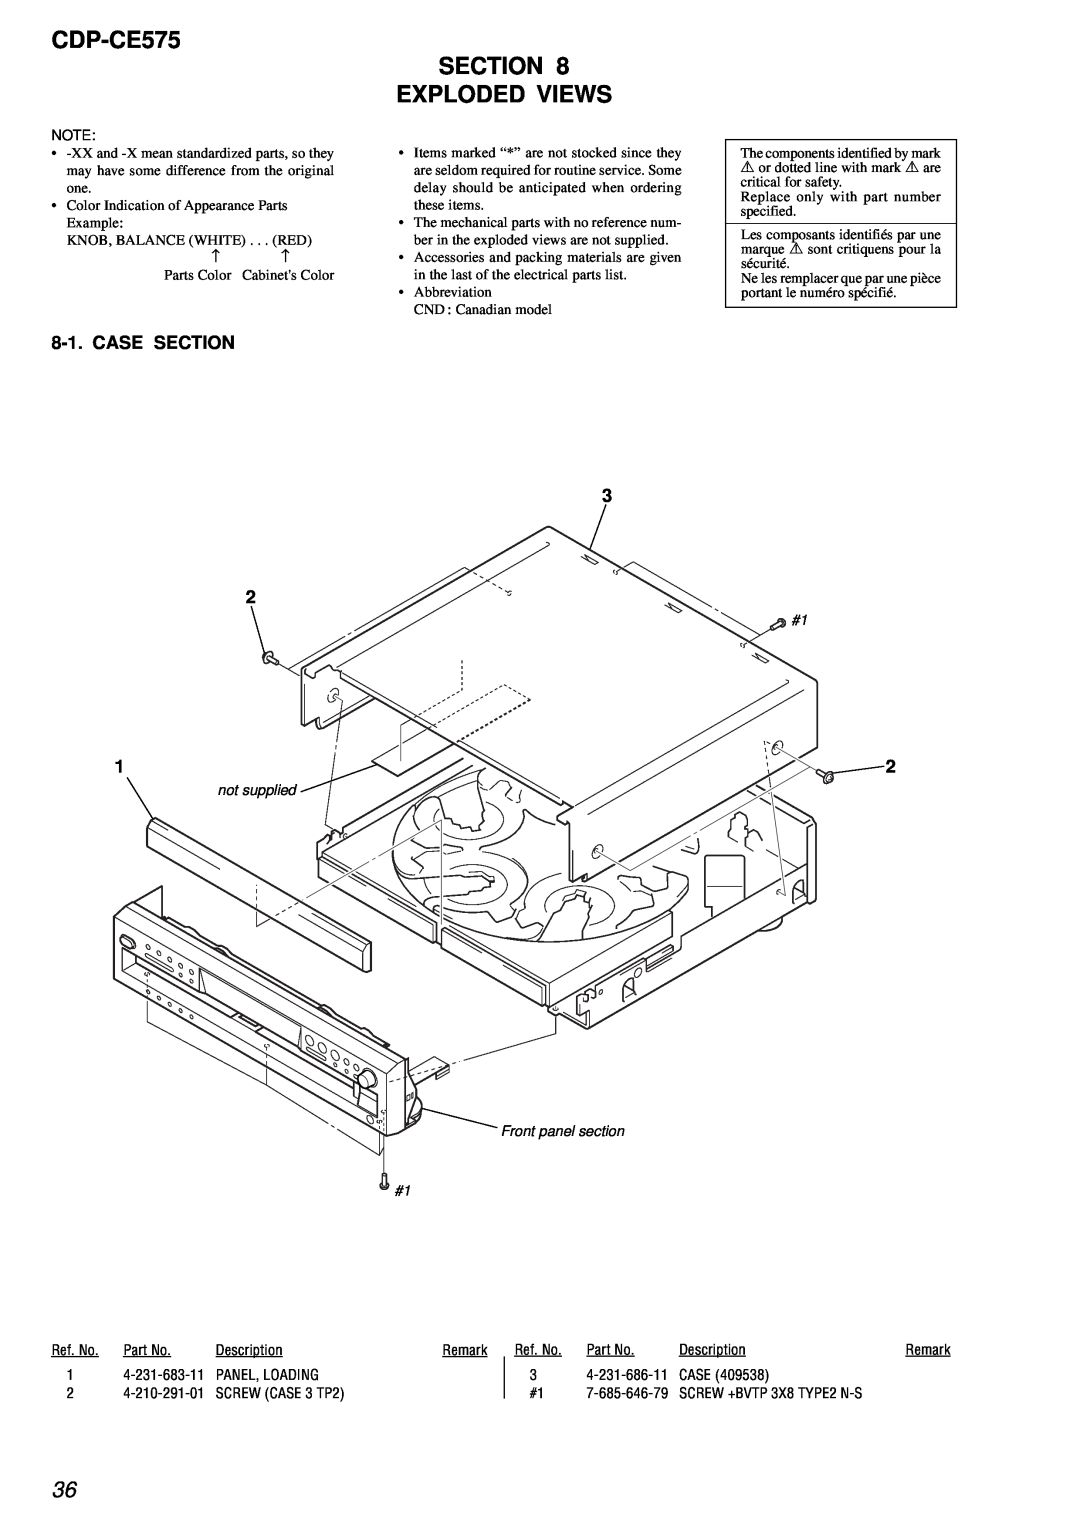 Sony CDP-CE575 service manual Section Exploded Views, Case Section 